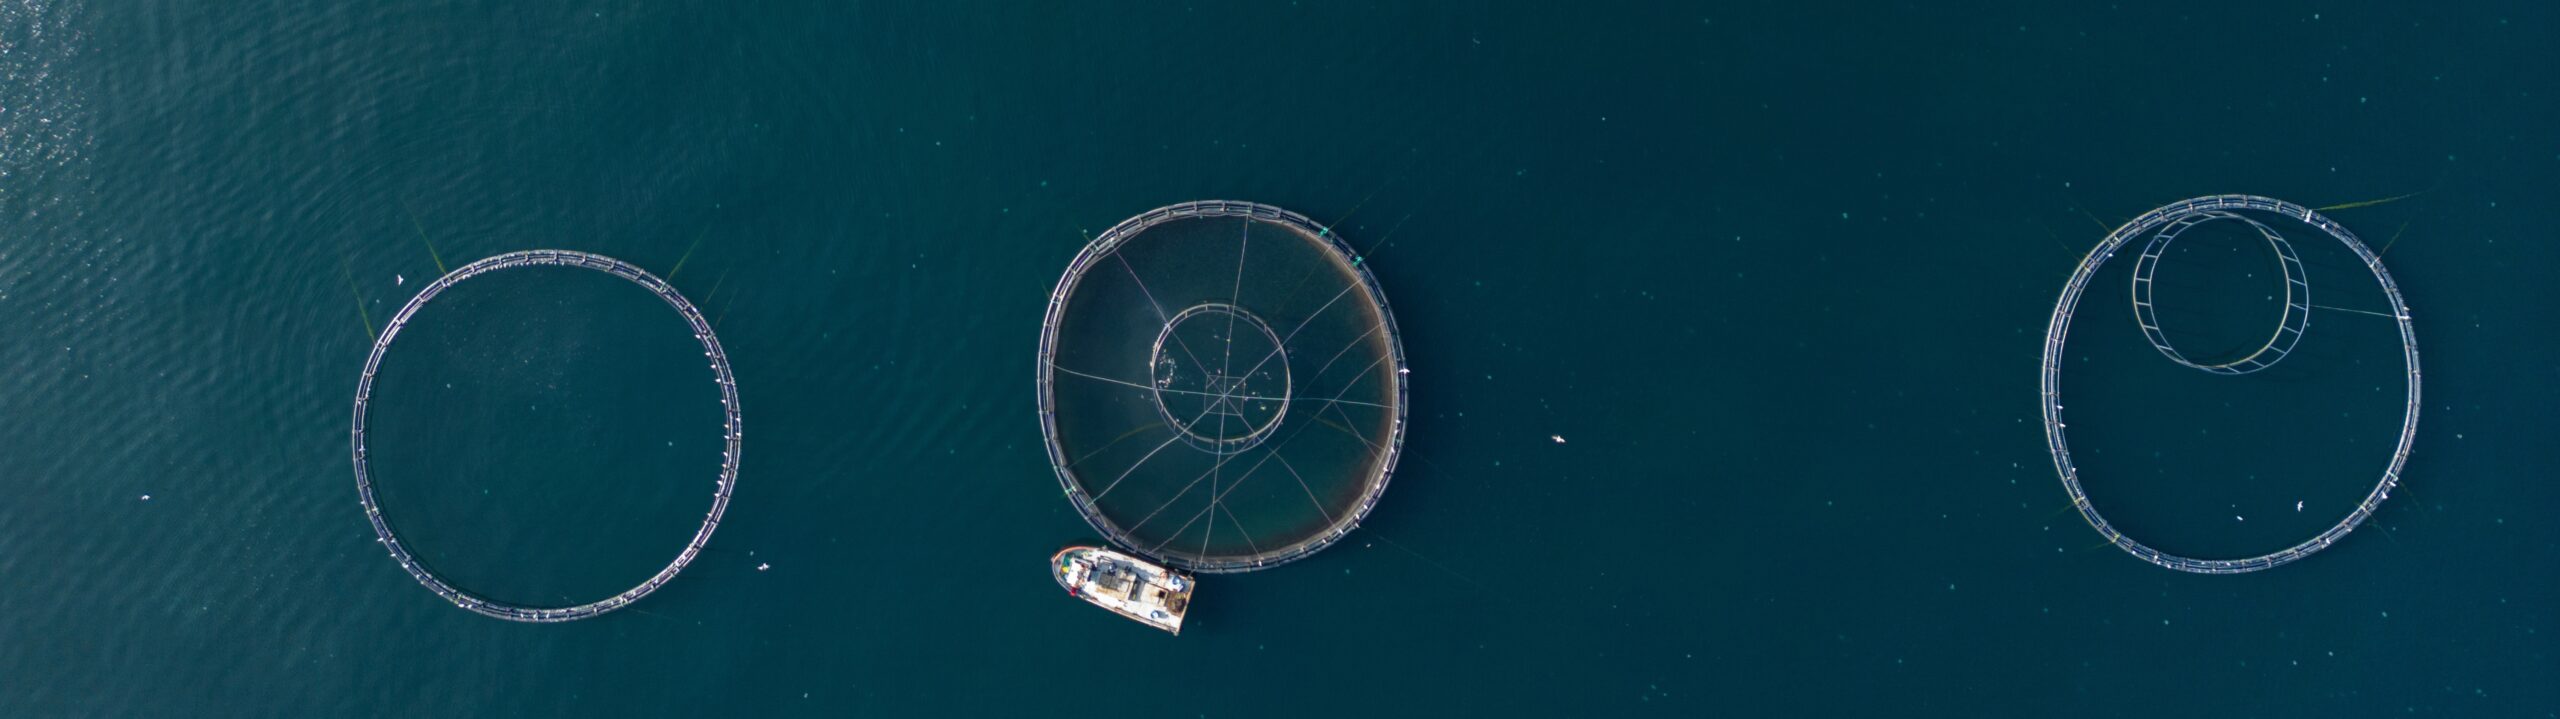 Six Fish Farm Cages Float On The Ocean, Covered With Netting To Prevent Birds From Eating The Fish Inside. Sea Bass Populate Some Of The Cages, While Others Sit Empty But Are Soon To Be Filled With Salmon. Trabzon, Trabzon Province, Black Sea Region, Turkiye, 2023. Havva Zorlu / We Animals Media